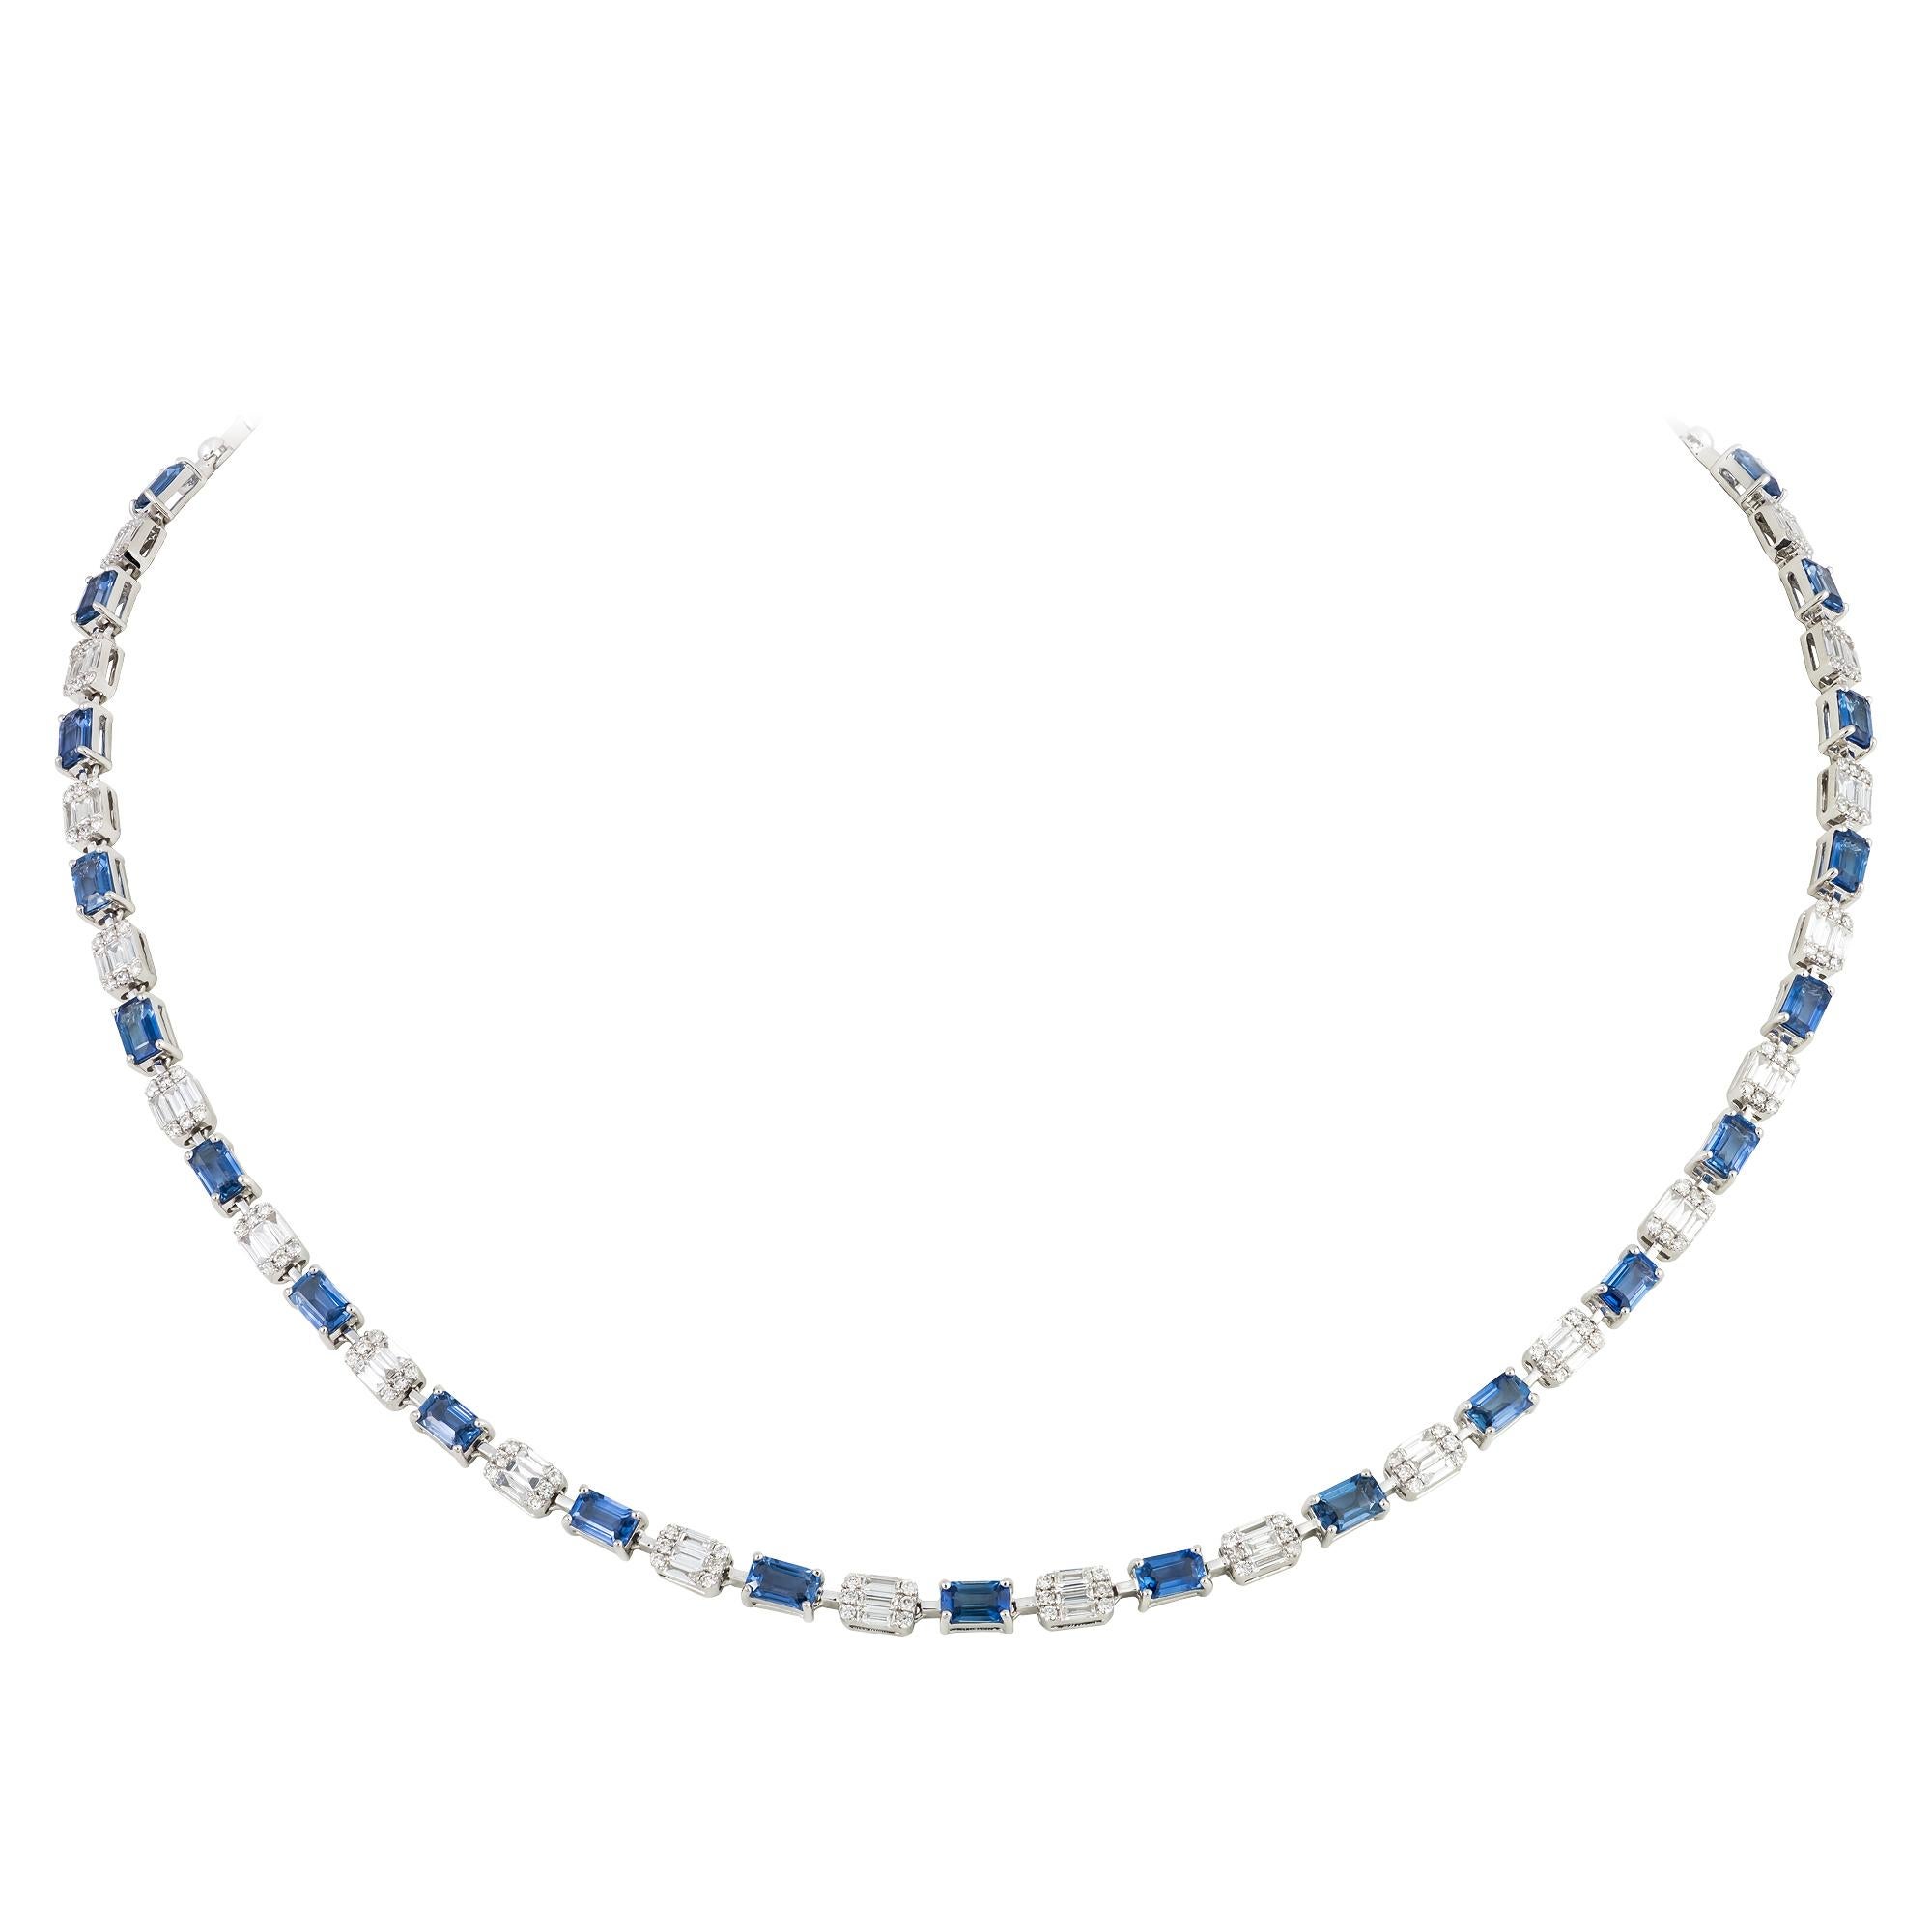 The Following Item we are offering is this Rare Important Radiant 18KT Gold Gorgeous Glittering and Sparkling Magnificent Fancy Cut Blue Sapphire and Diamond Necklace. Necklace contains approx 10CTS of Beautiful Fancy Cut Blue Sapphires and